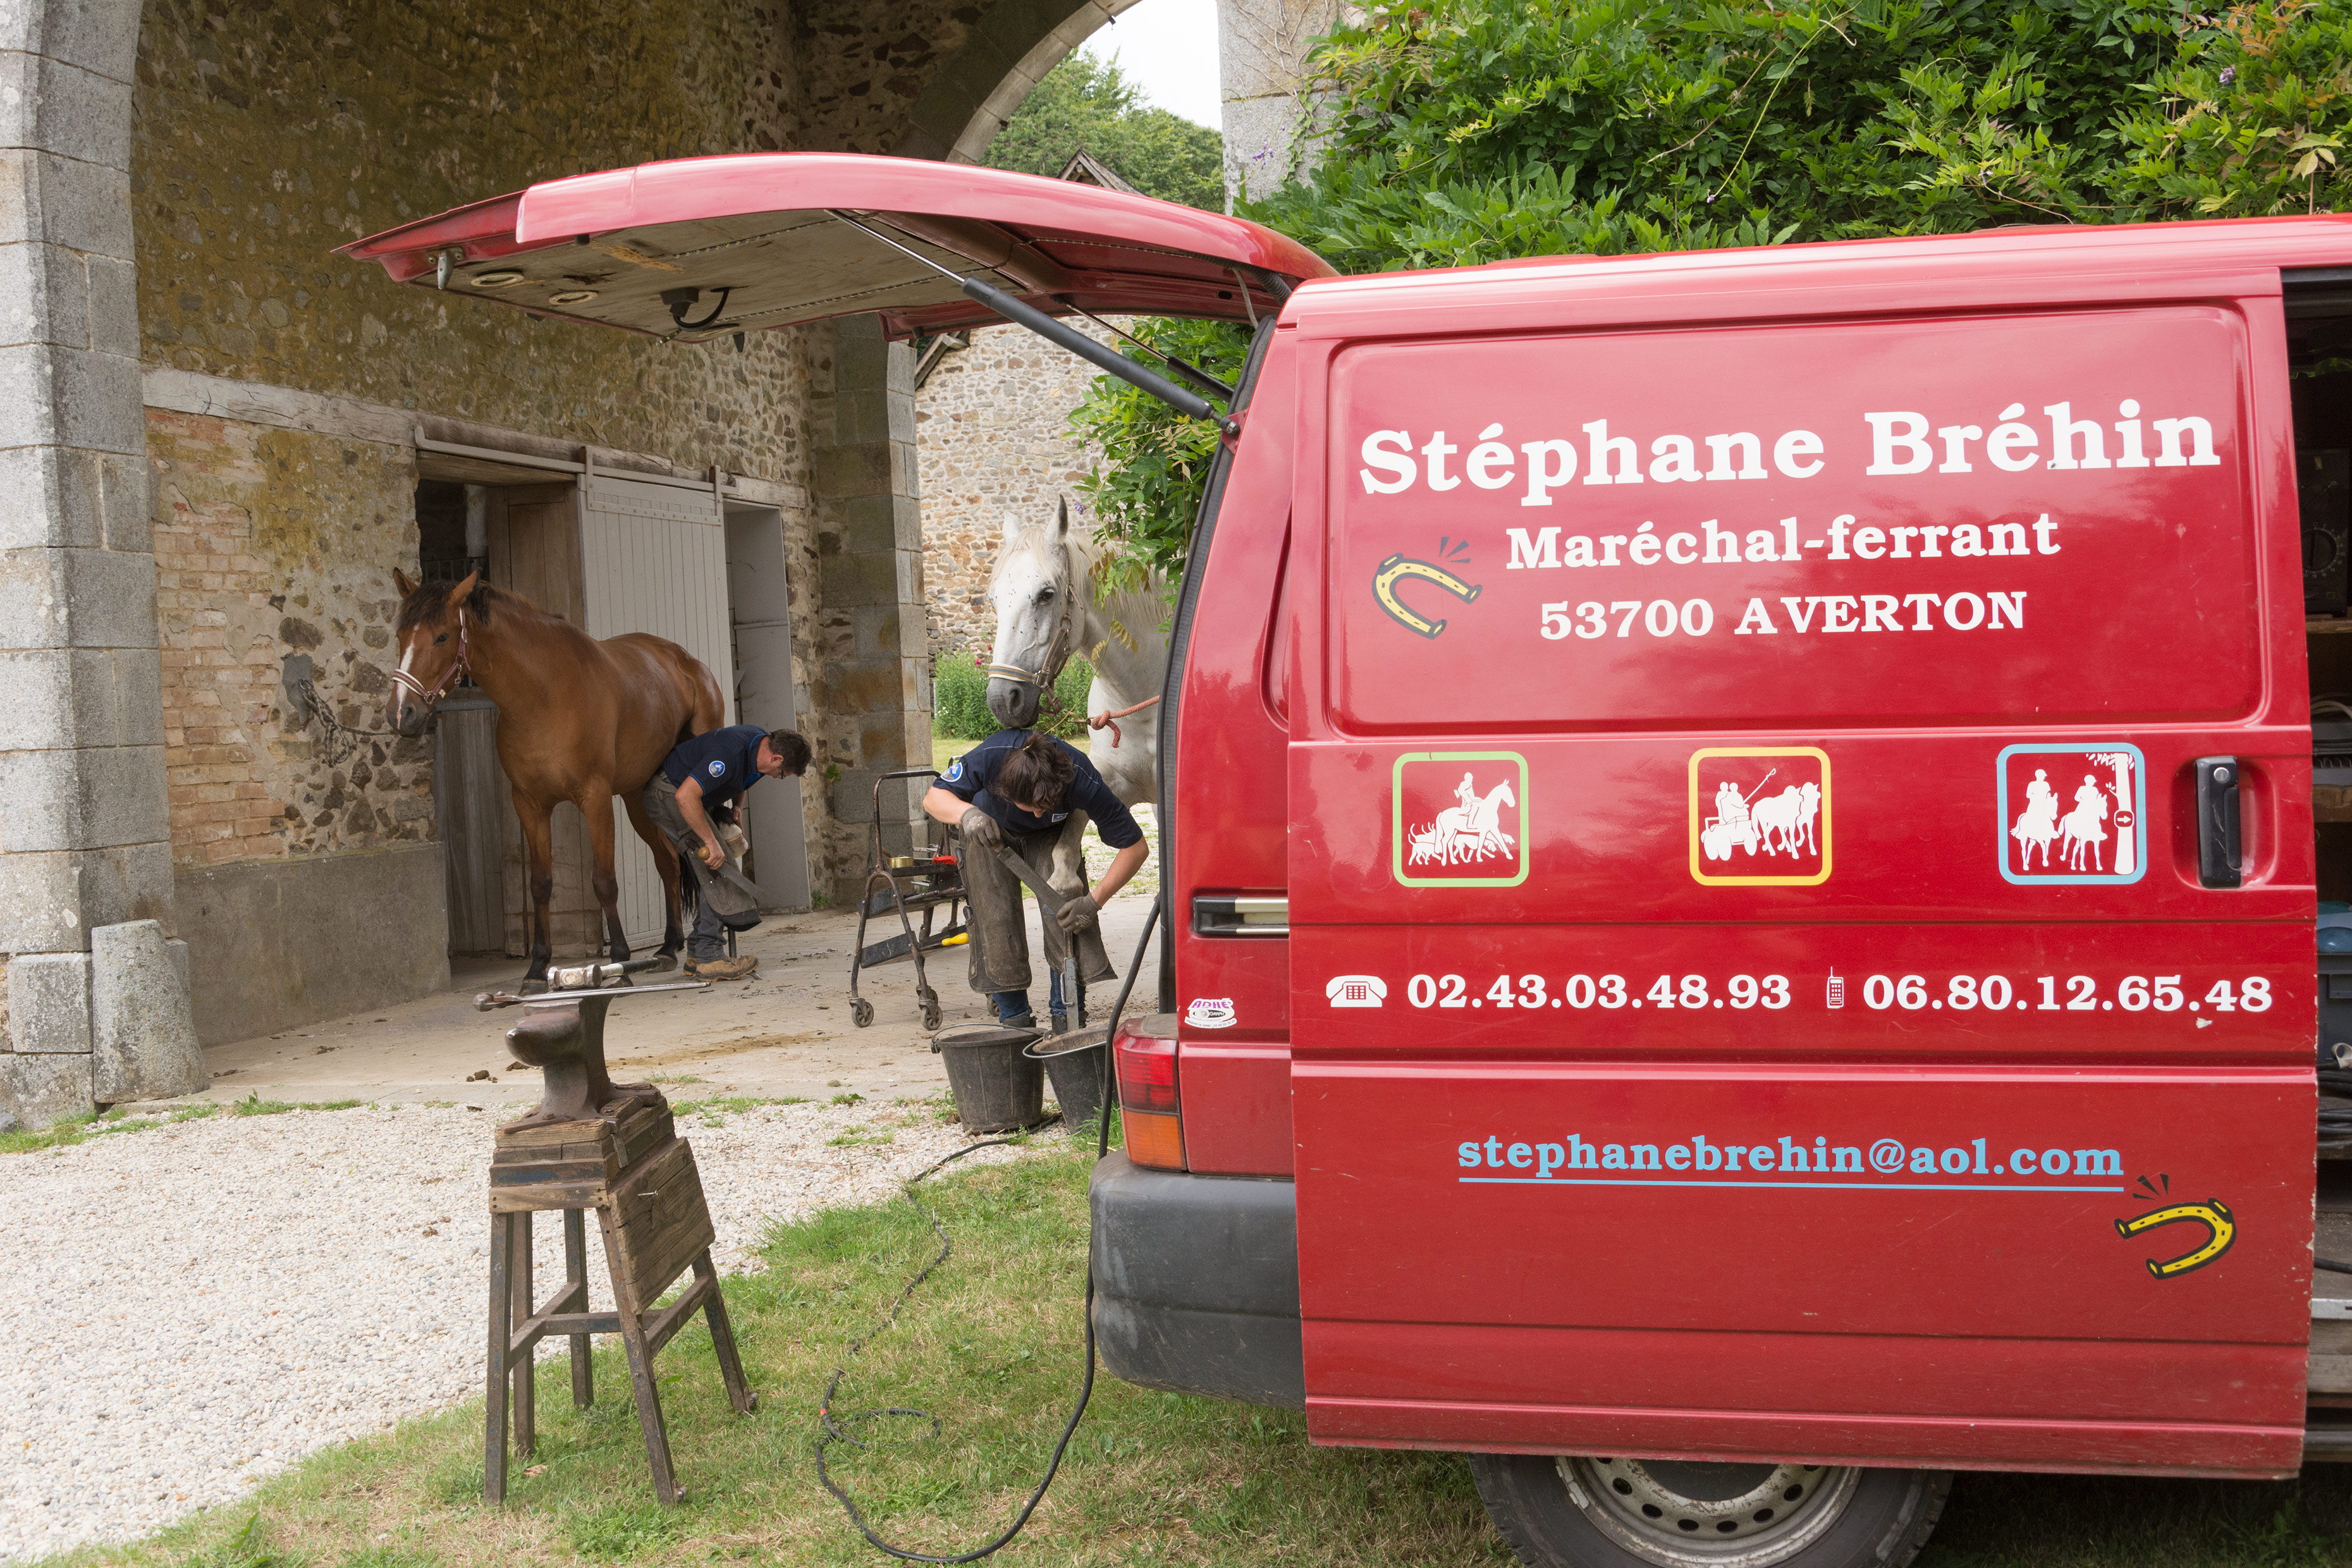 The French farrier Stéphane Brehin at work